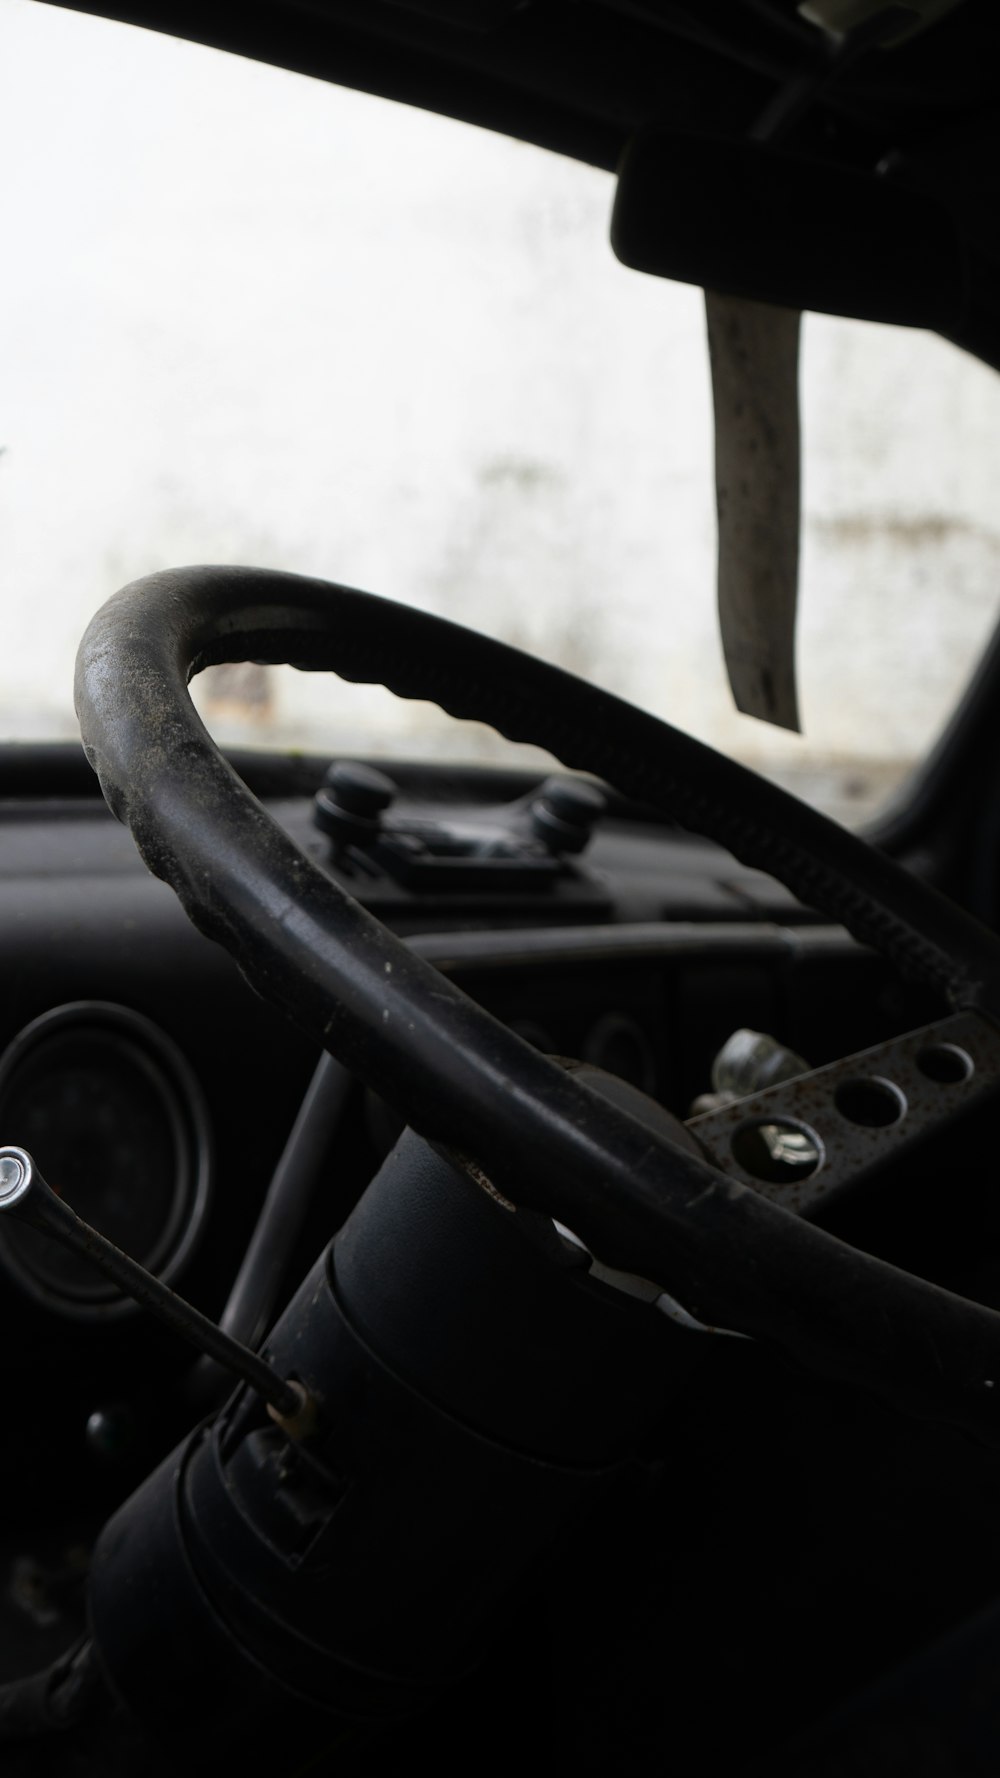 a steering wheel and dashboard of a vehicle